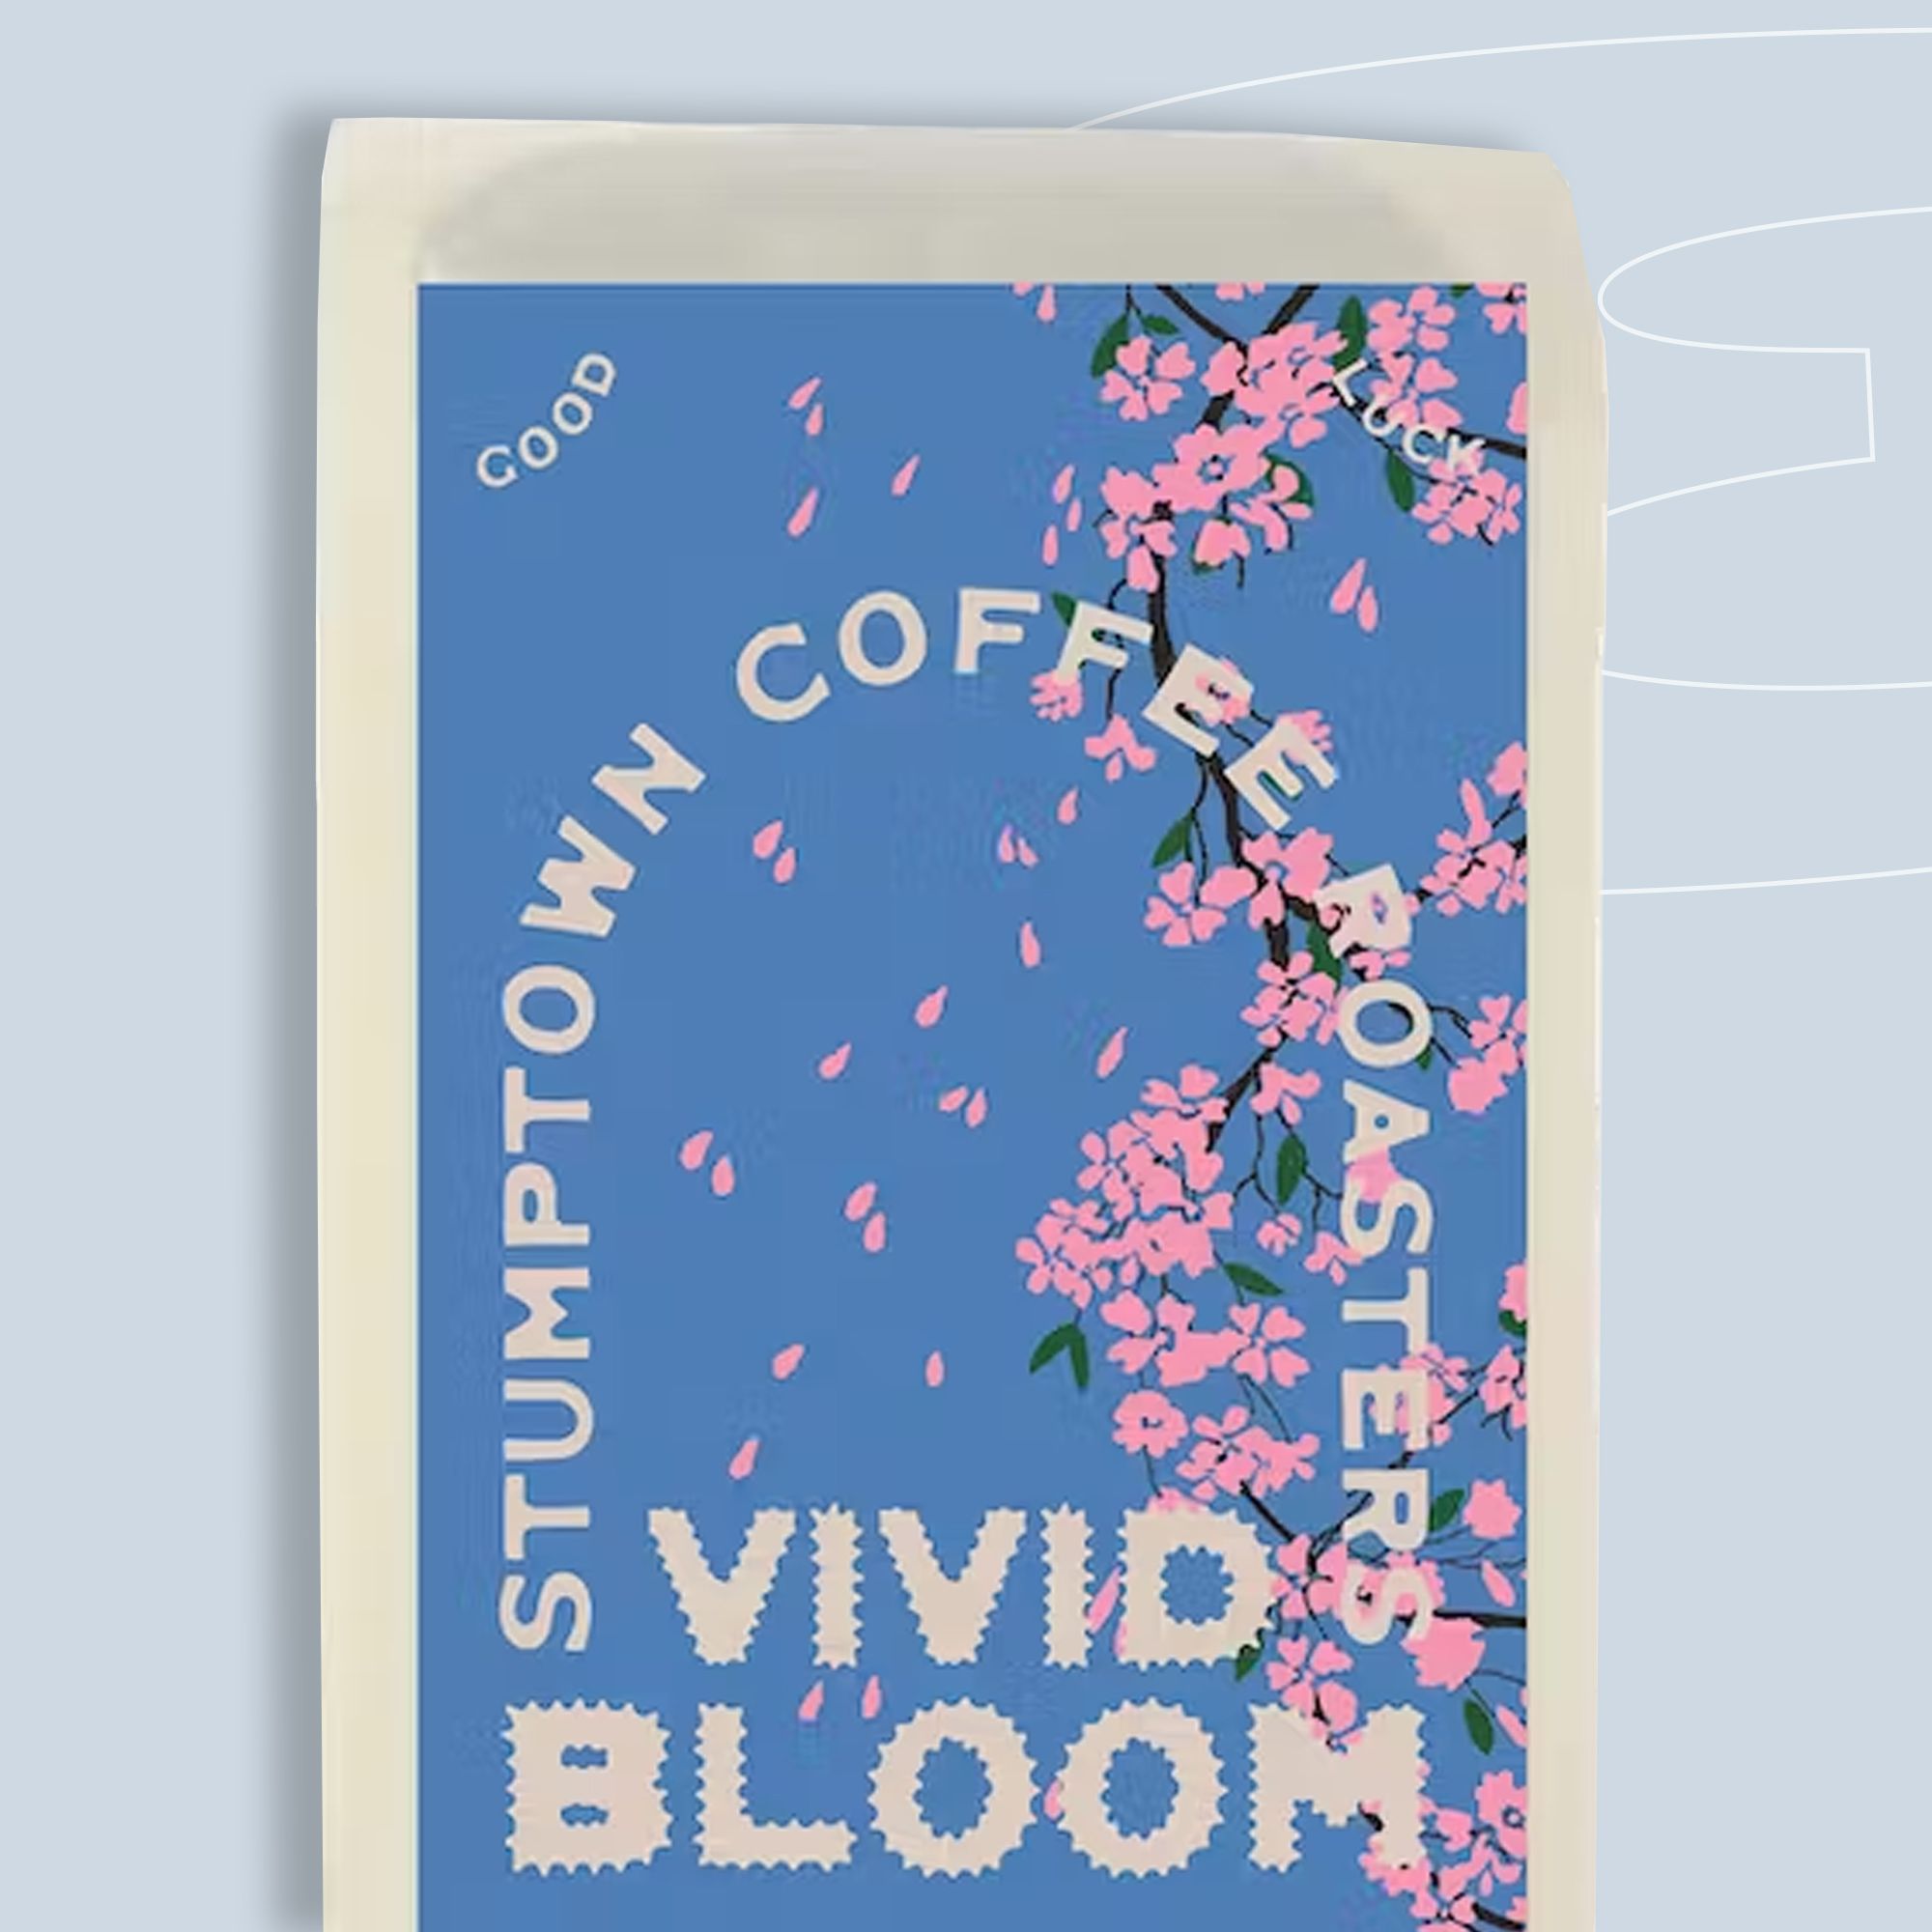 A Floral Coffee That's Made for Summertime